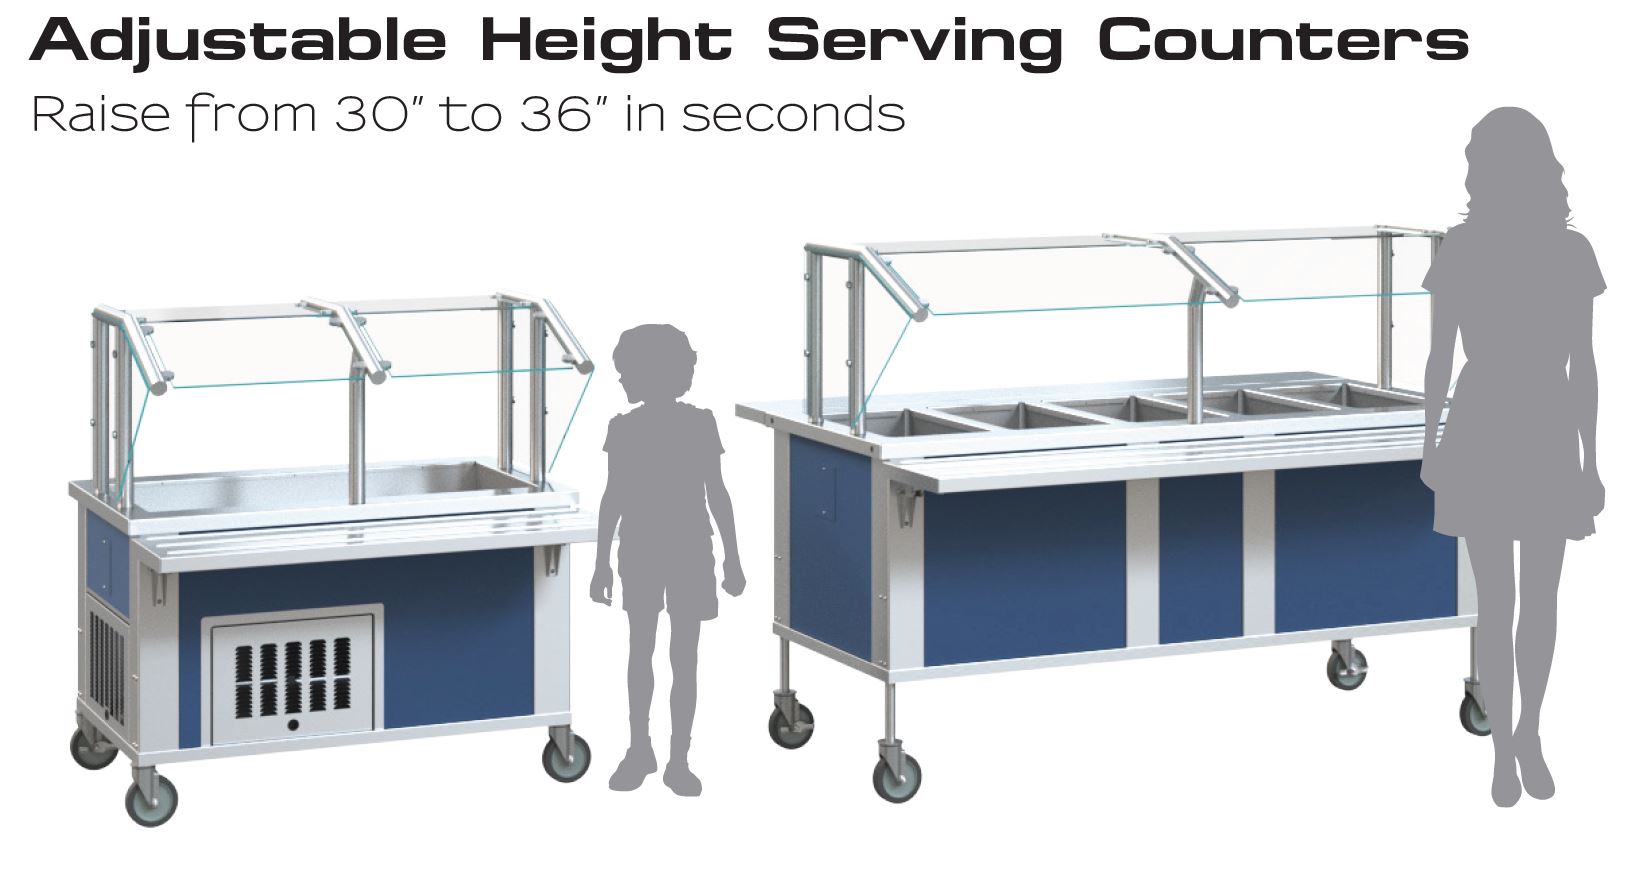 Piper Focus - Adjustable Height Serving Counter